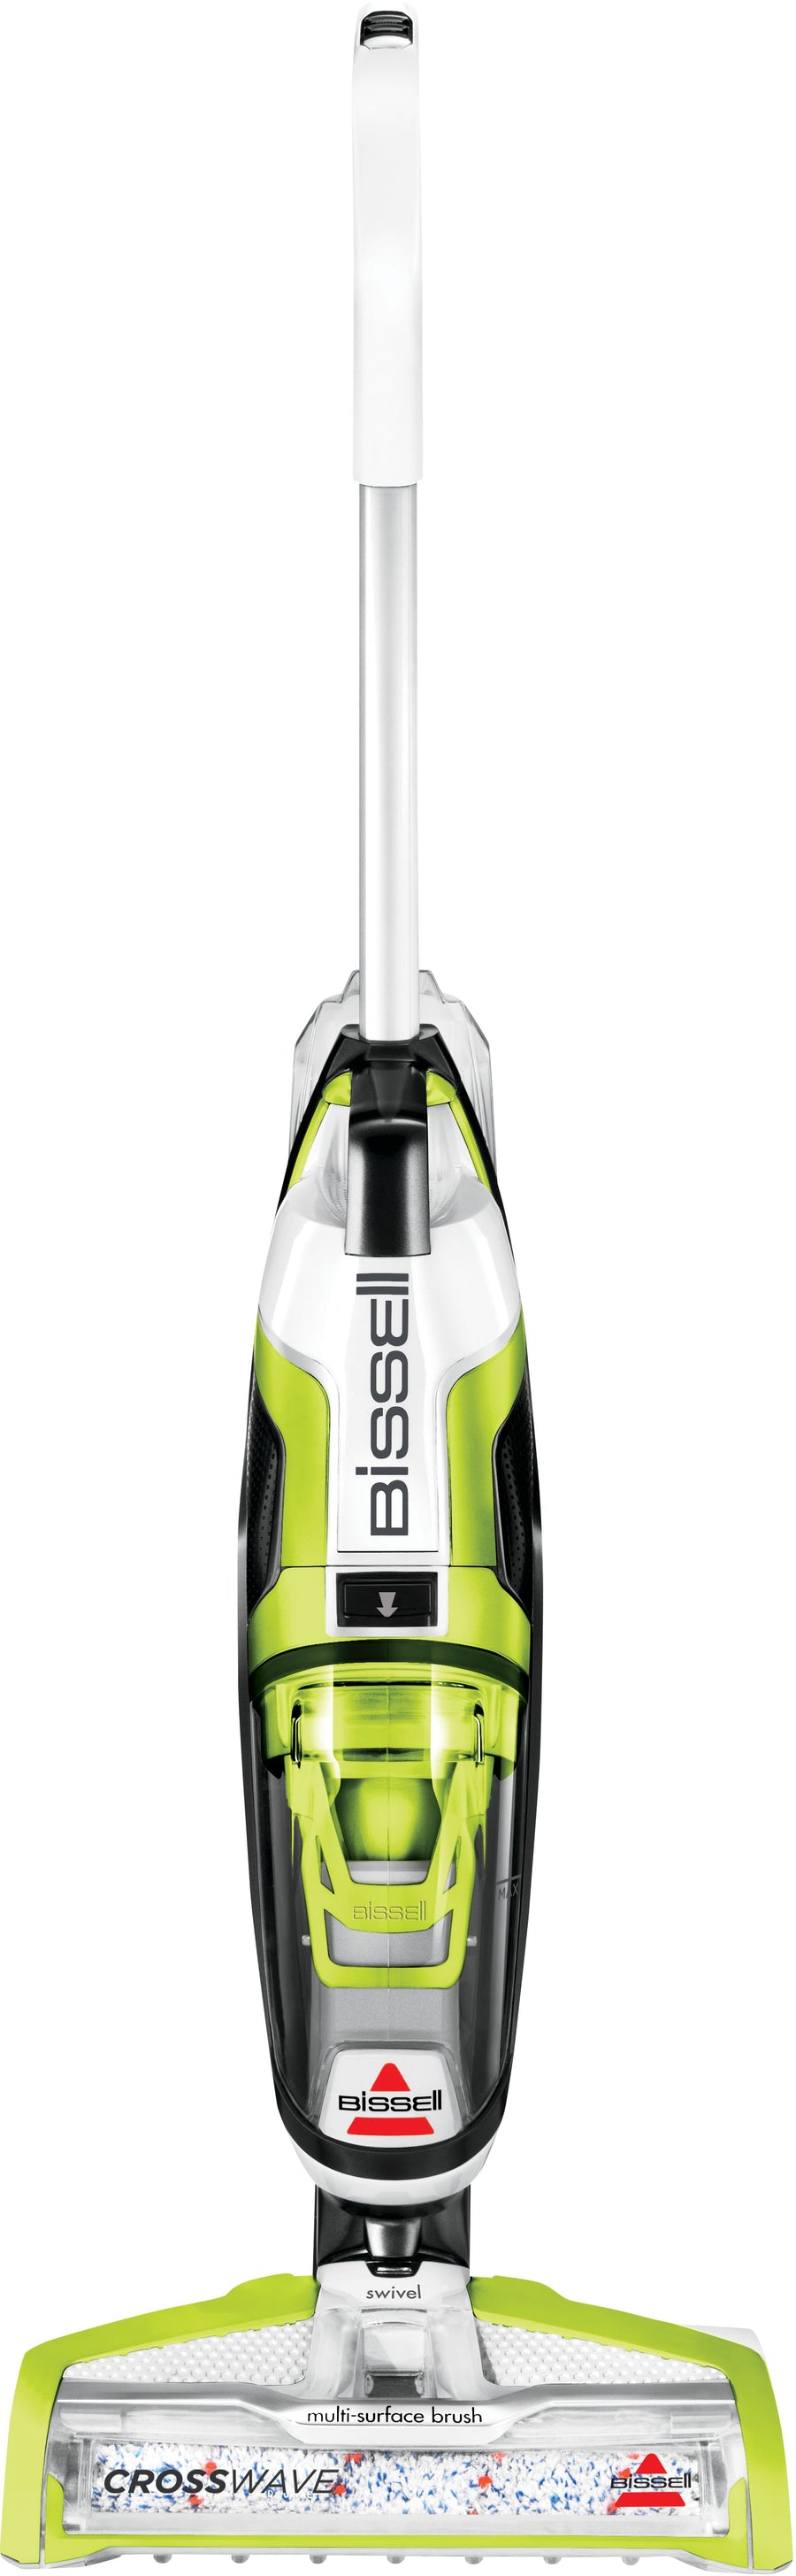 BISSELL CrossWave All-in-One Multi-Surface Wet Dry Upright Vacuum - Molded White, Titanium and Cha Cha Lime Green_0